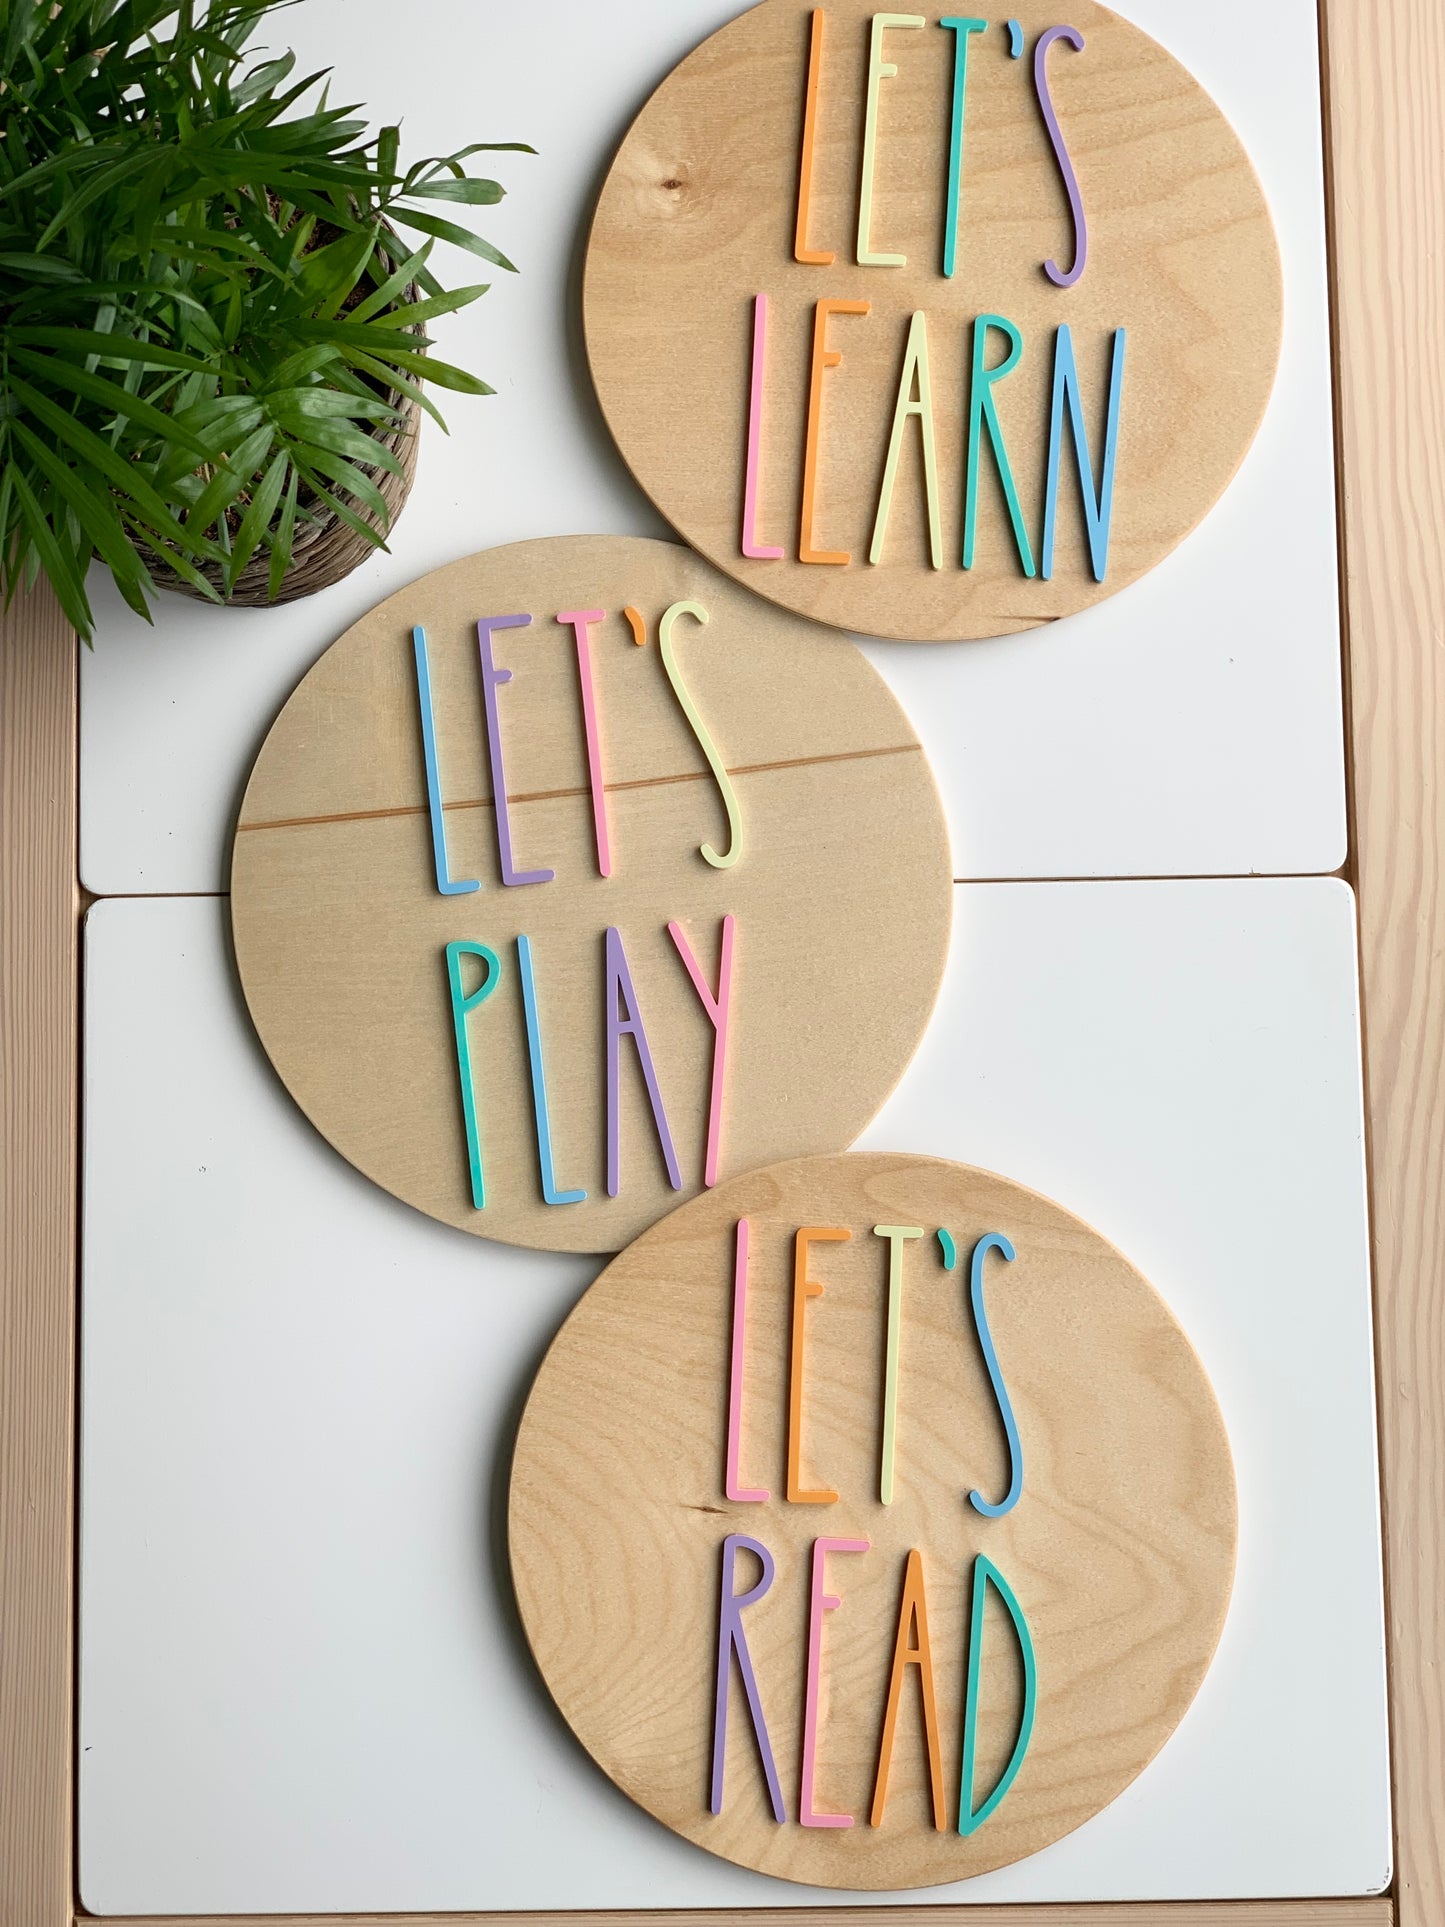 Let’s Play, Read, Learn Set of 3 Signs